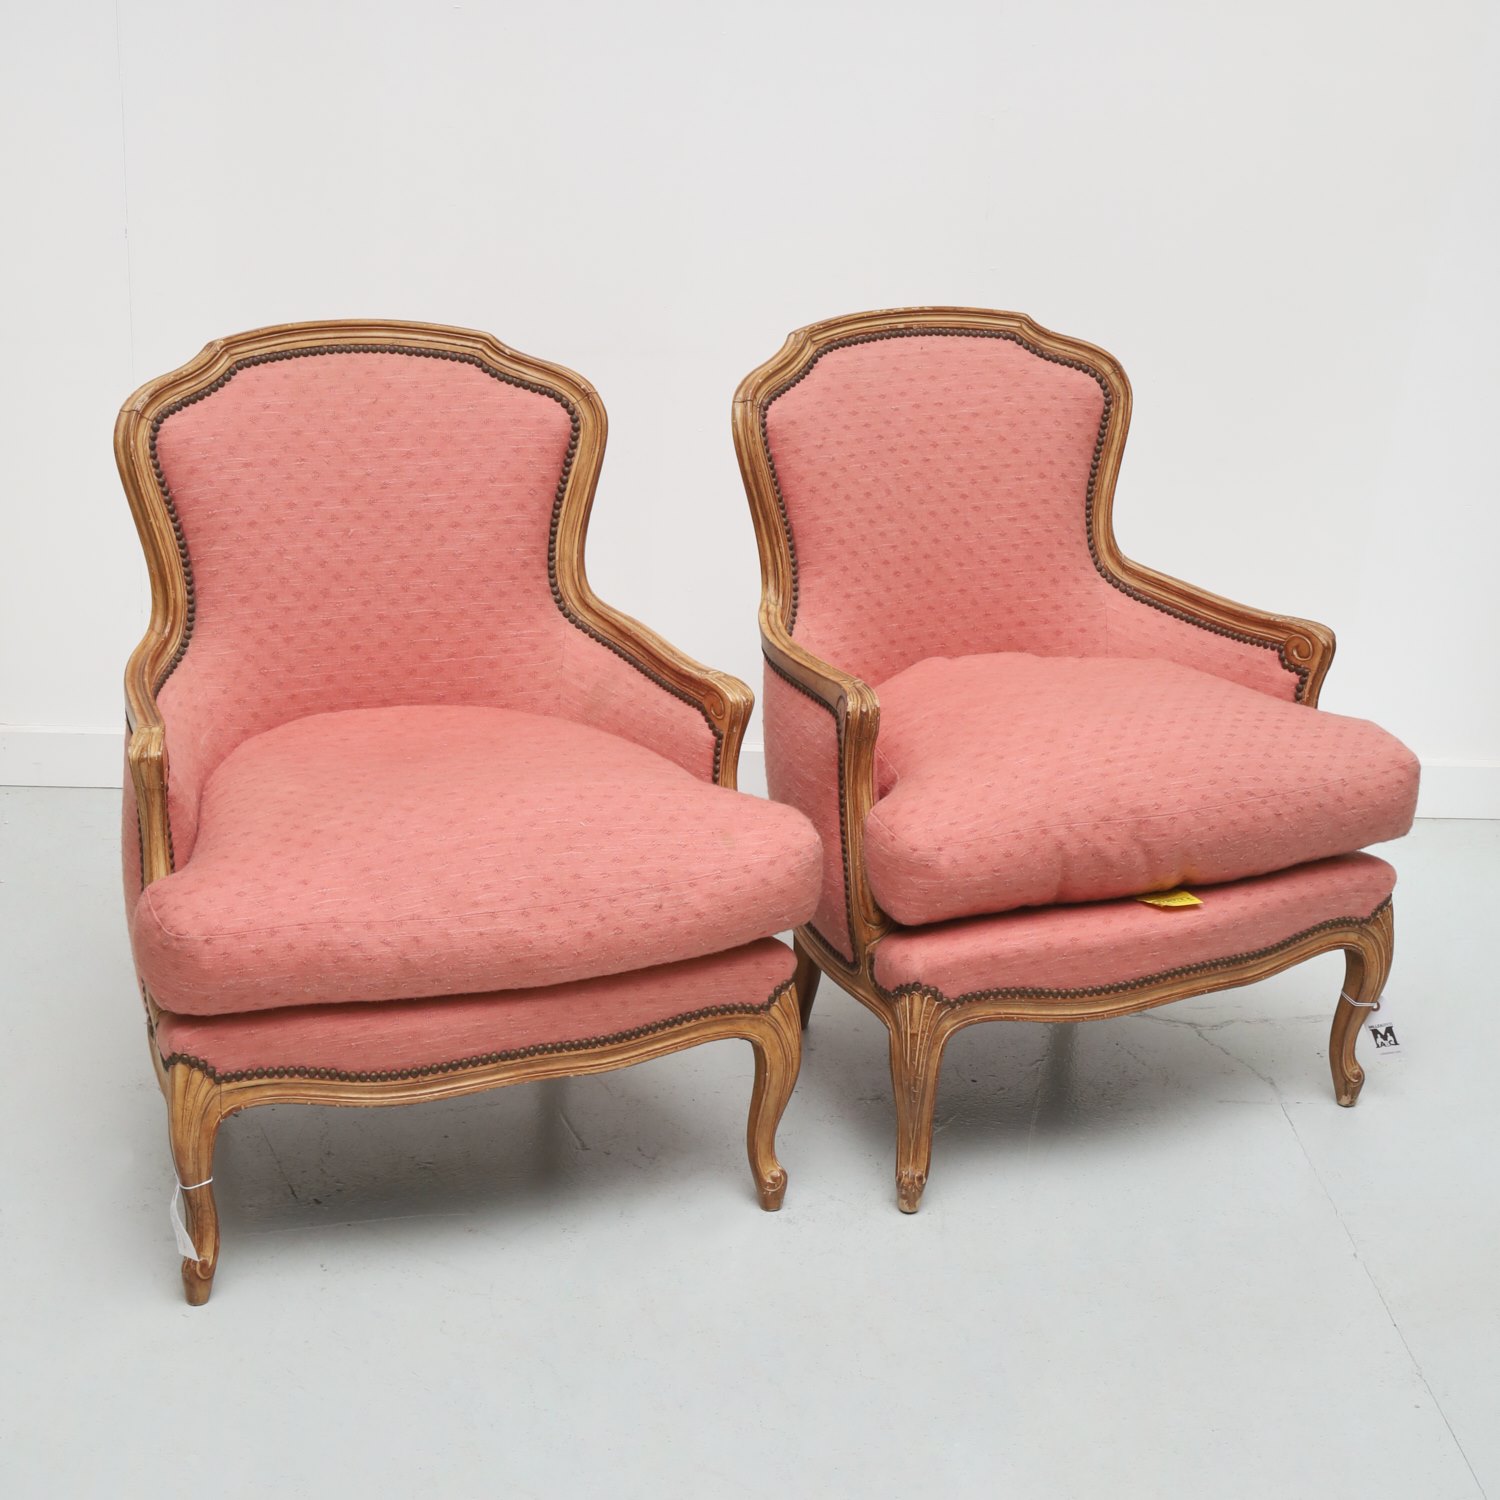 PAIR THOMAS DE ANGELIS UPHOLSTERED 361f2a